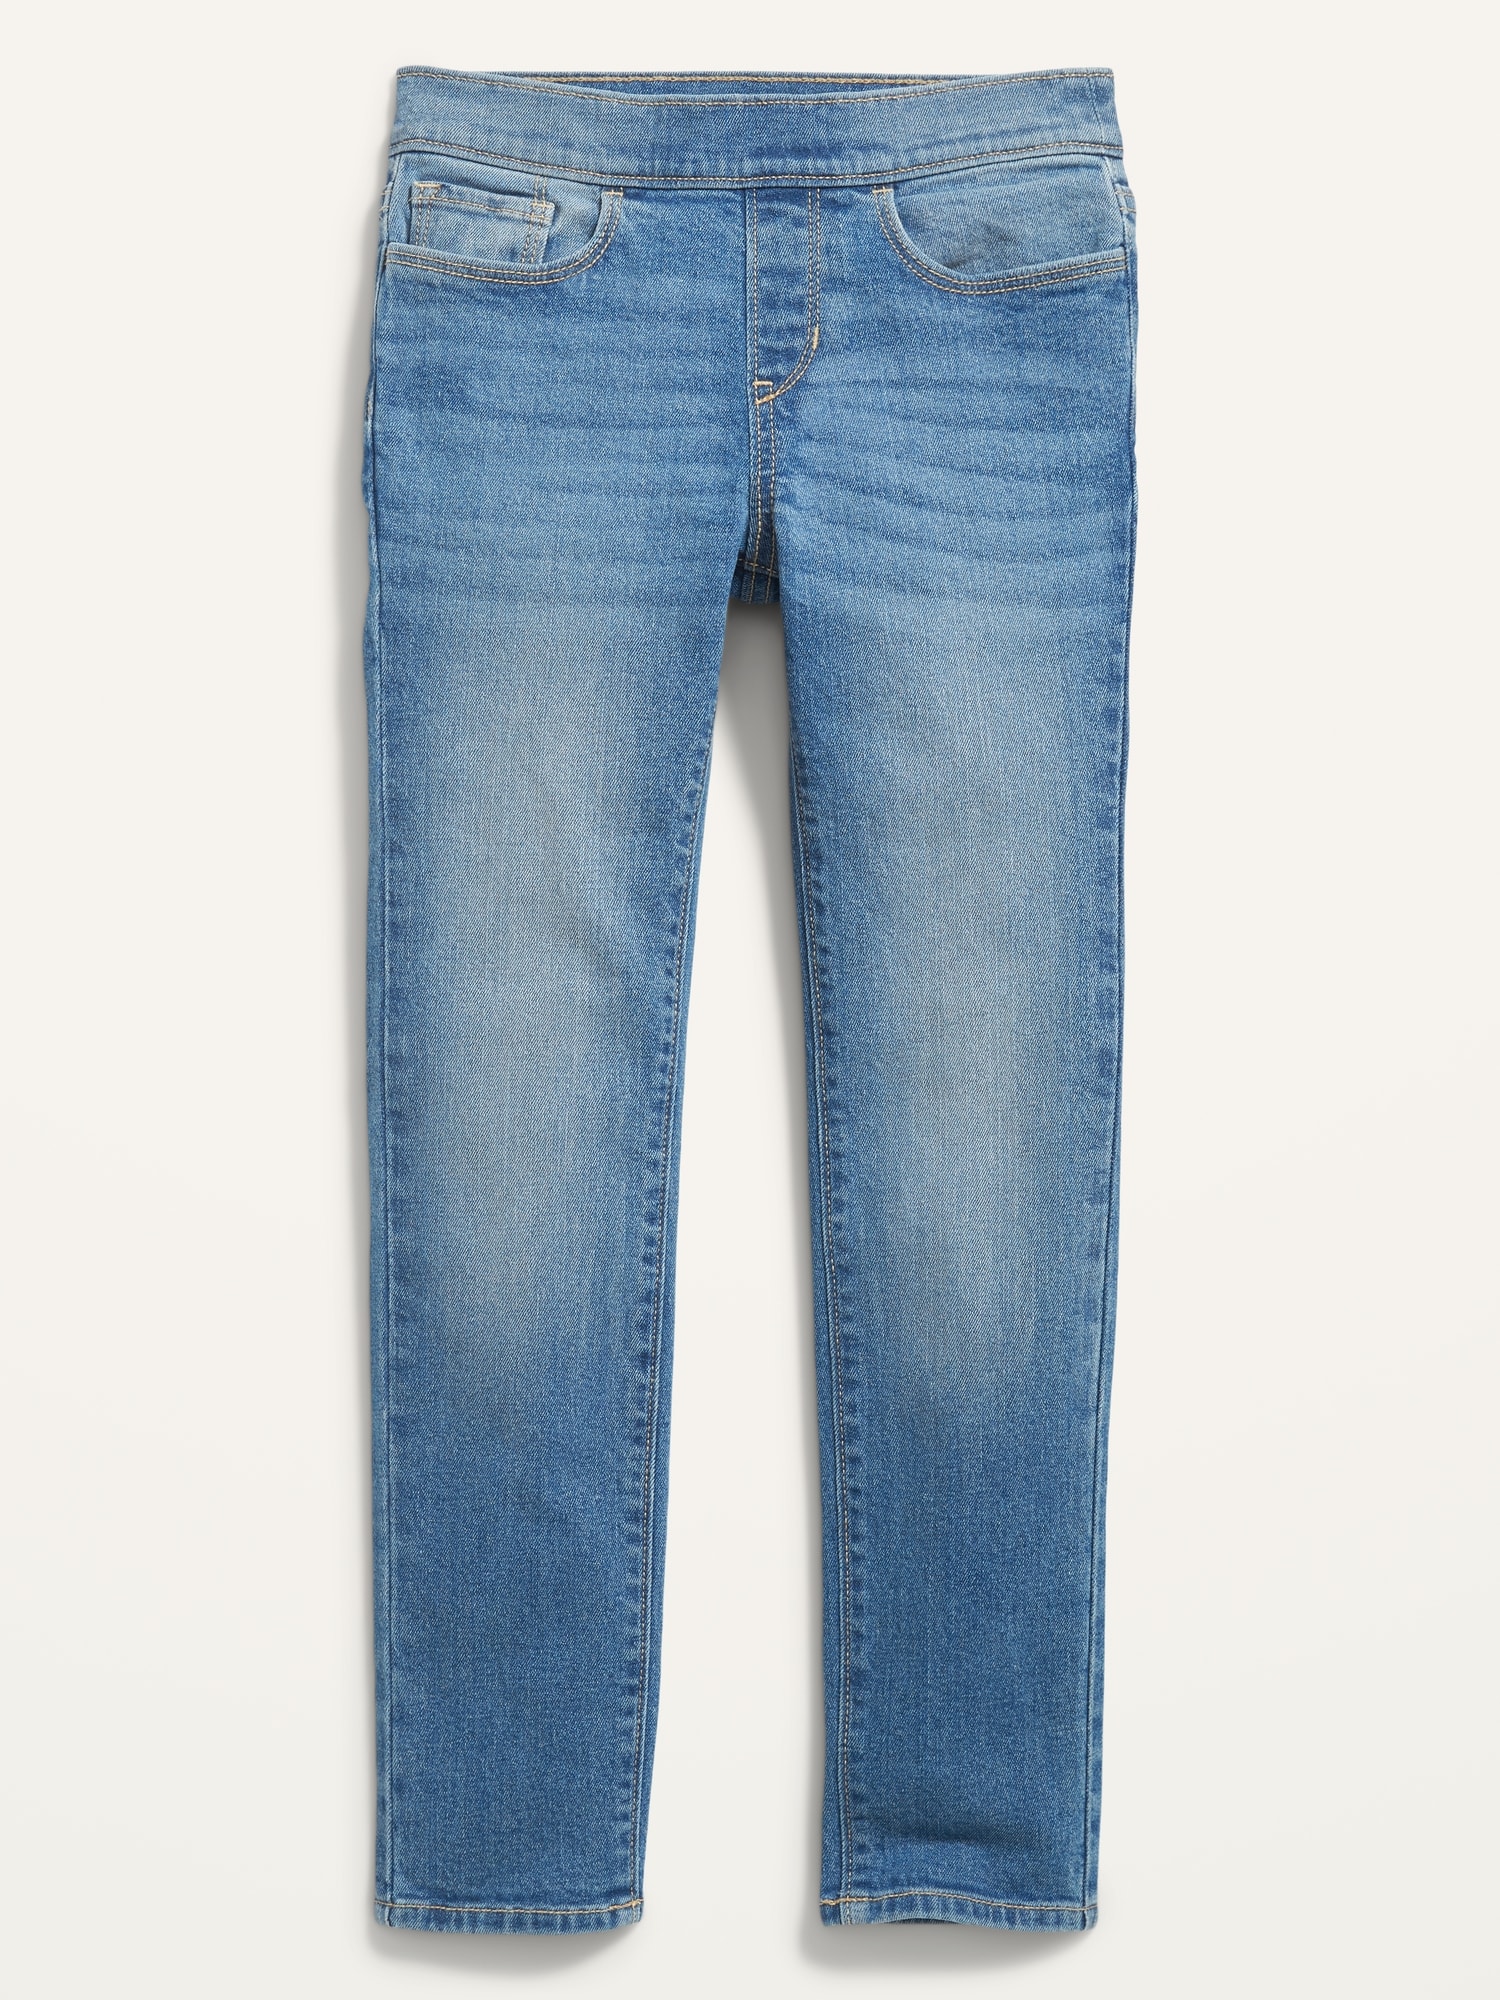 Girls Essential 3-Button Denim Skinny Jeans with Rolled Cuffs from